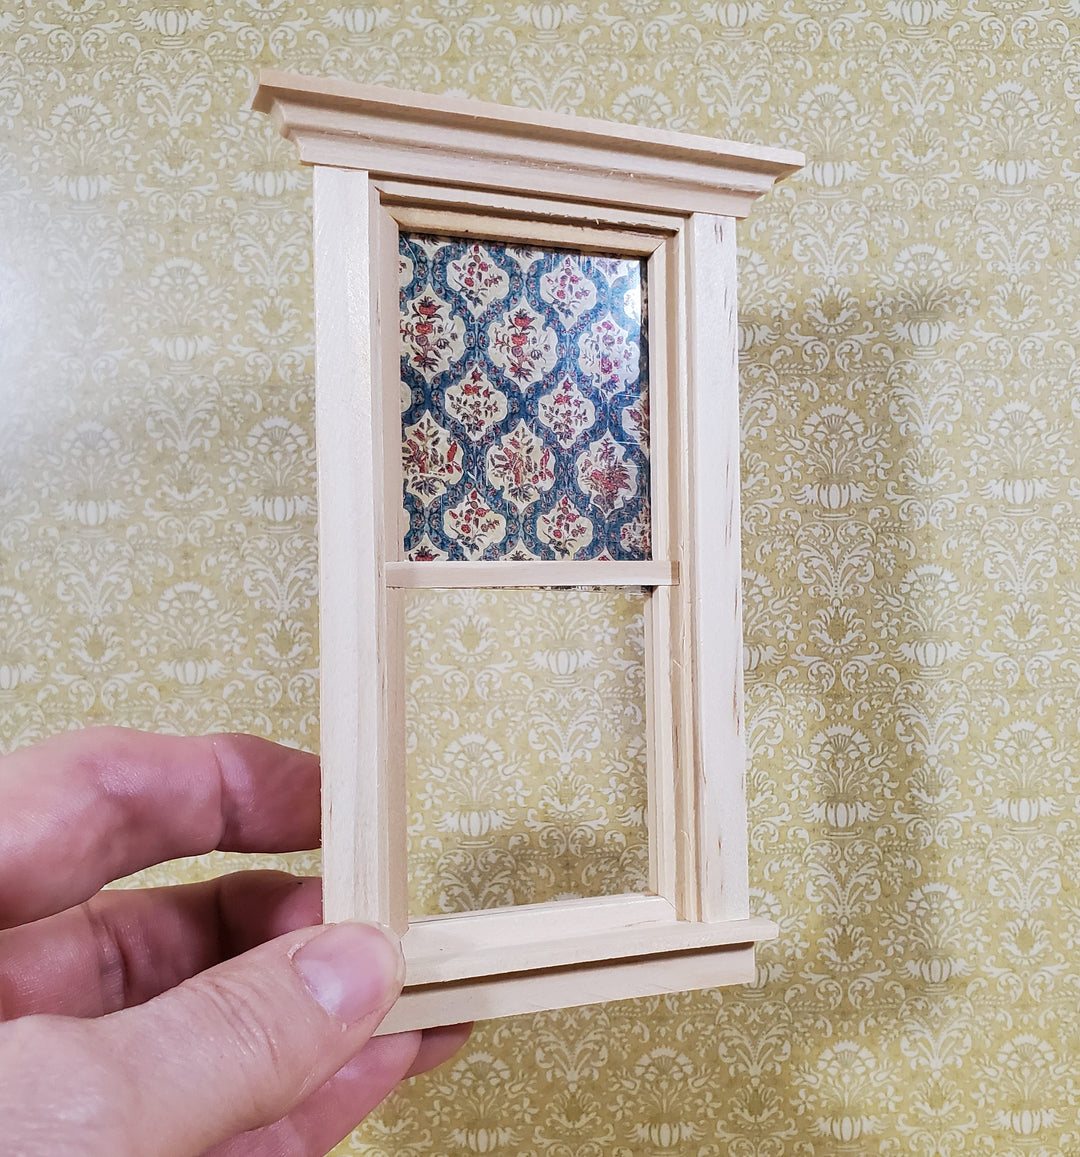 Dollhouse Simulated Stained Glass Insert Cut to Size Blues for Windows or Doors 1:12 Scale